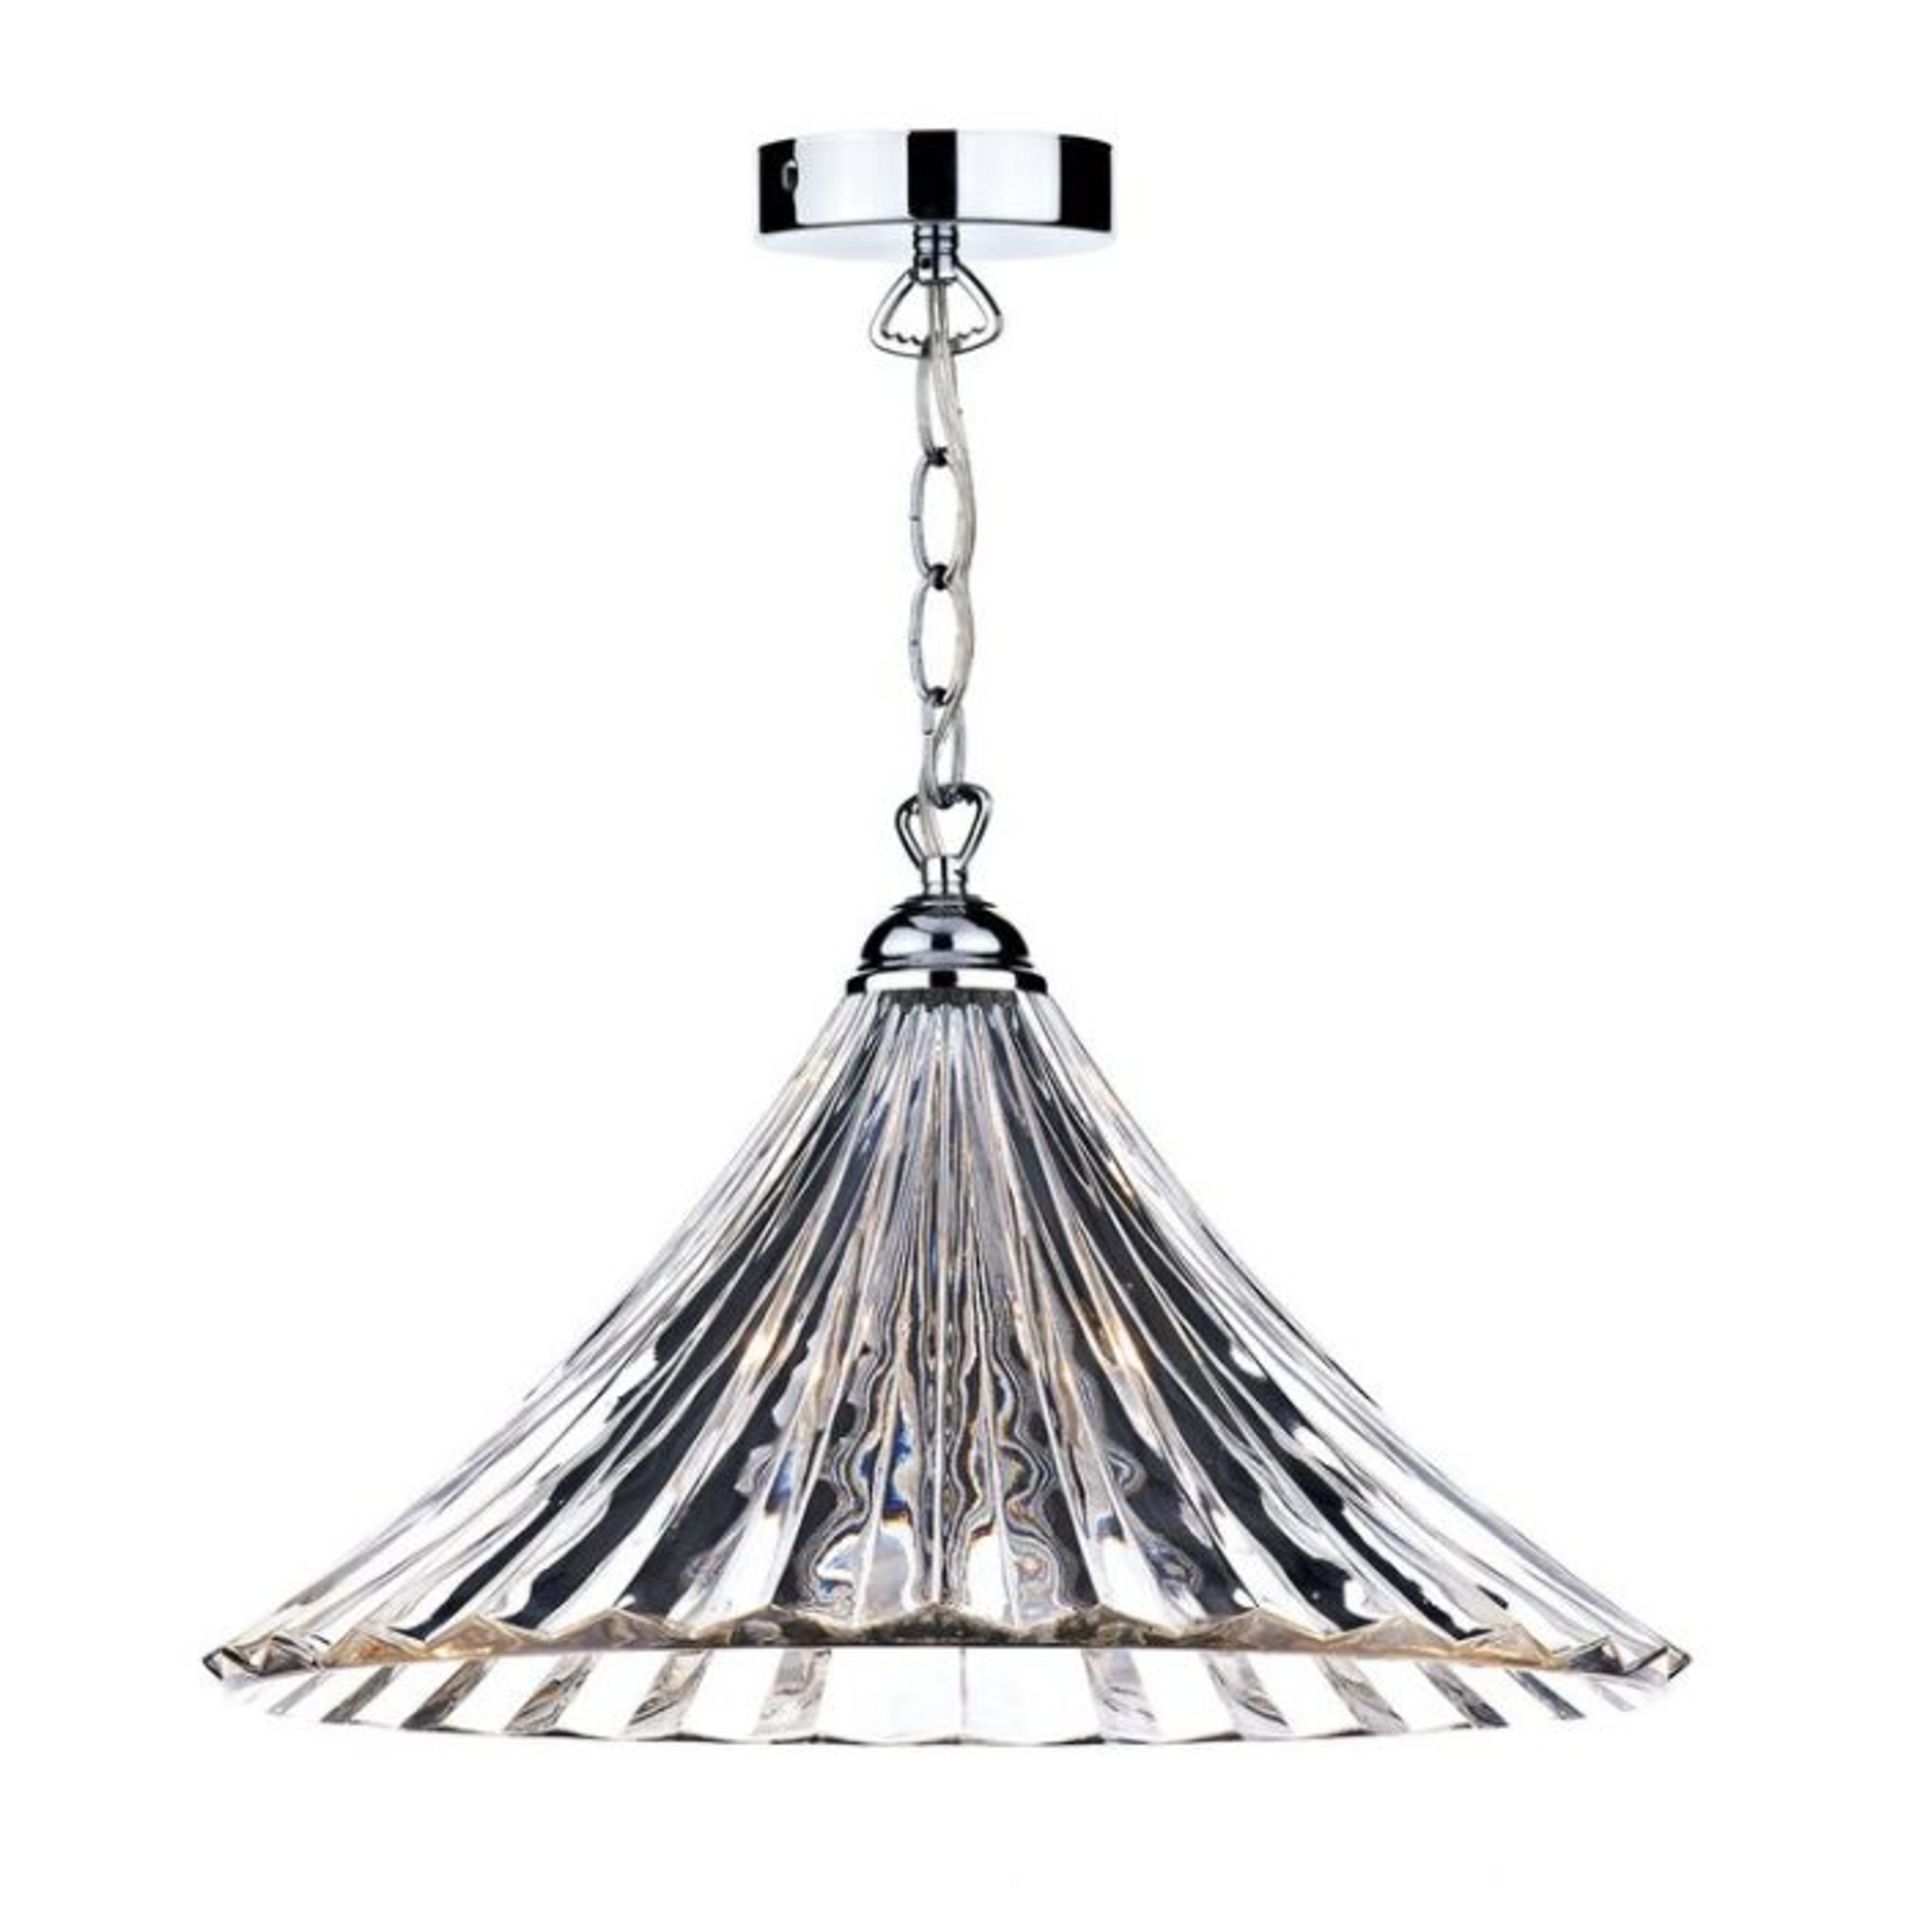 ClassicLiving, Behne 1 - Light Cone Pendant (POLISHED CHROME) - RRP £137.99 (N/A - 26949/9)